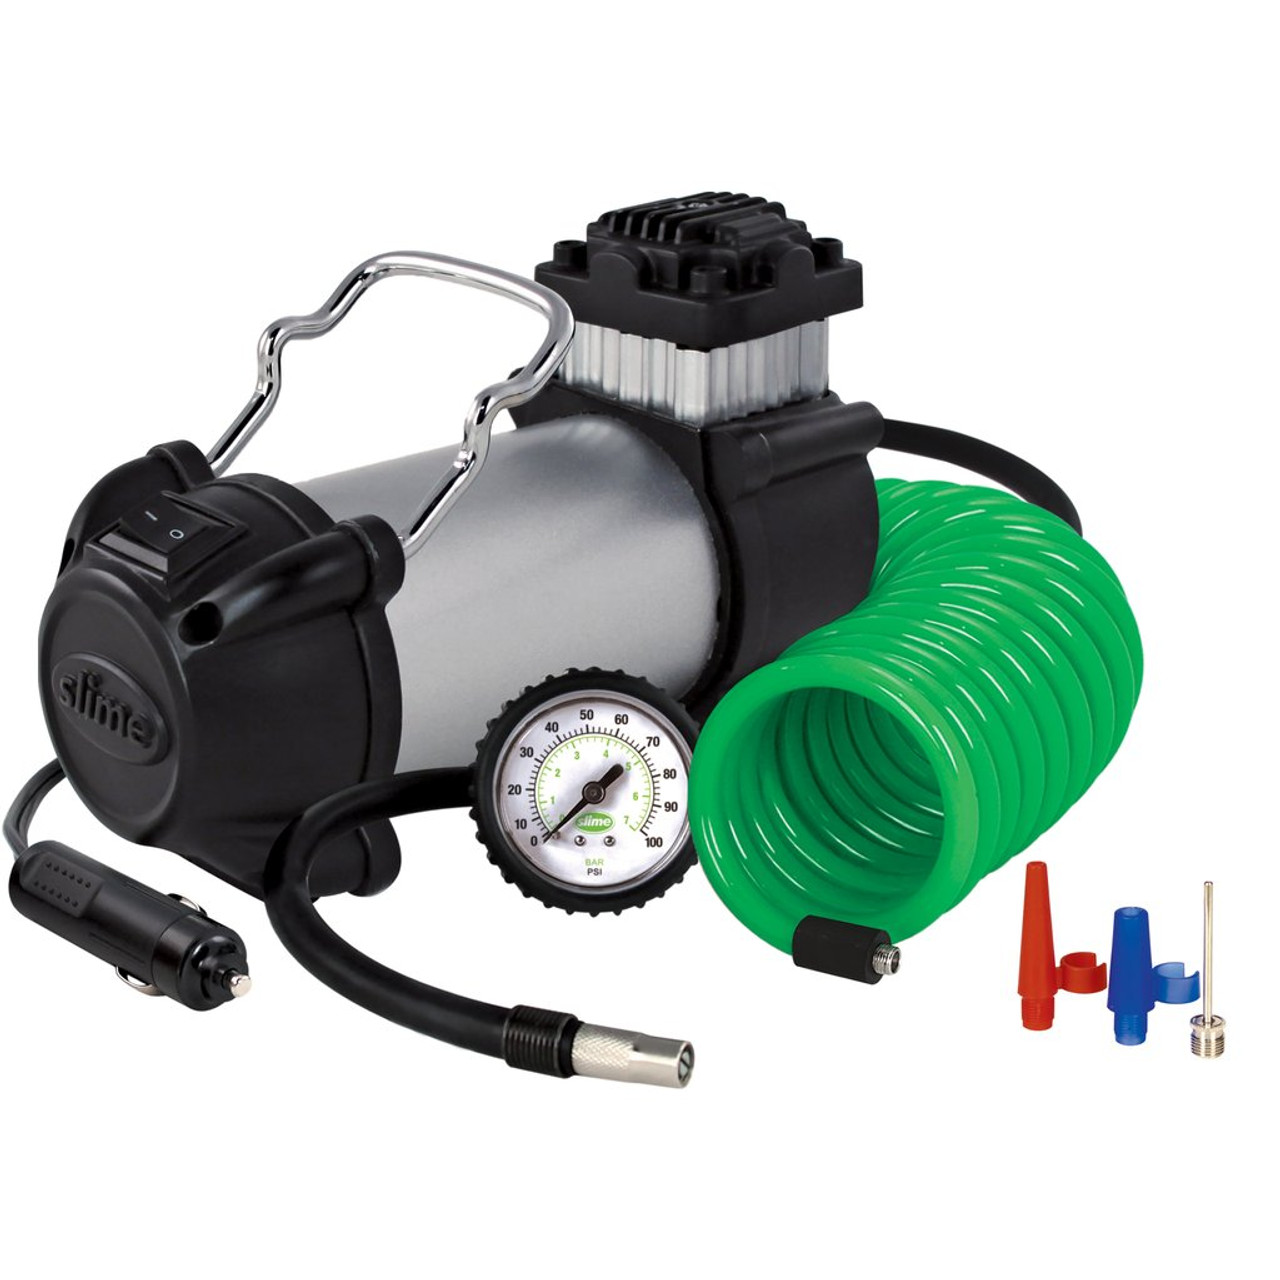 Slime 40030 Compact Pro Power Direct Drive Tire Inflator